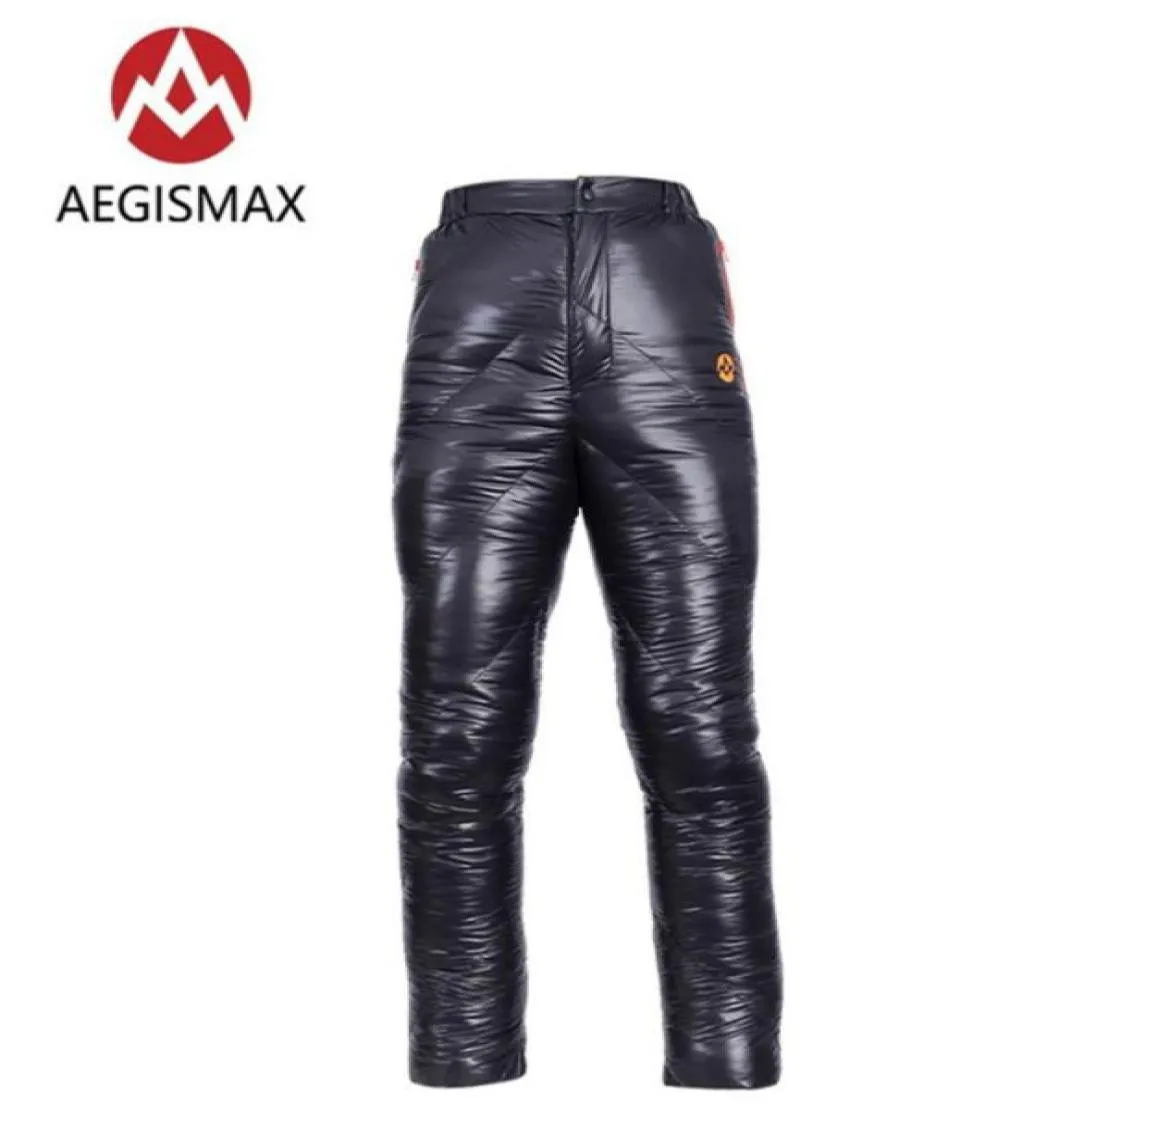 AEGISMAX 95 White Goose Down Men Pants Ultralight Outdoor Travel Camping Hiking Waterproof Warm Trousers 800FP Thicken7797715